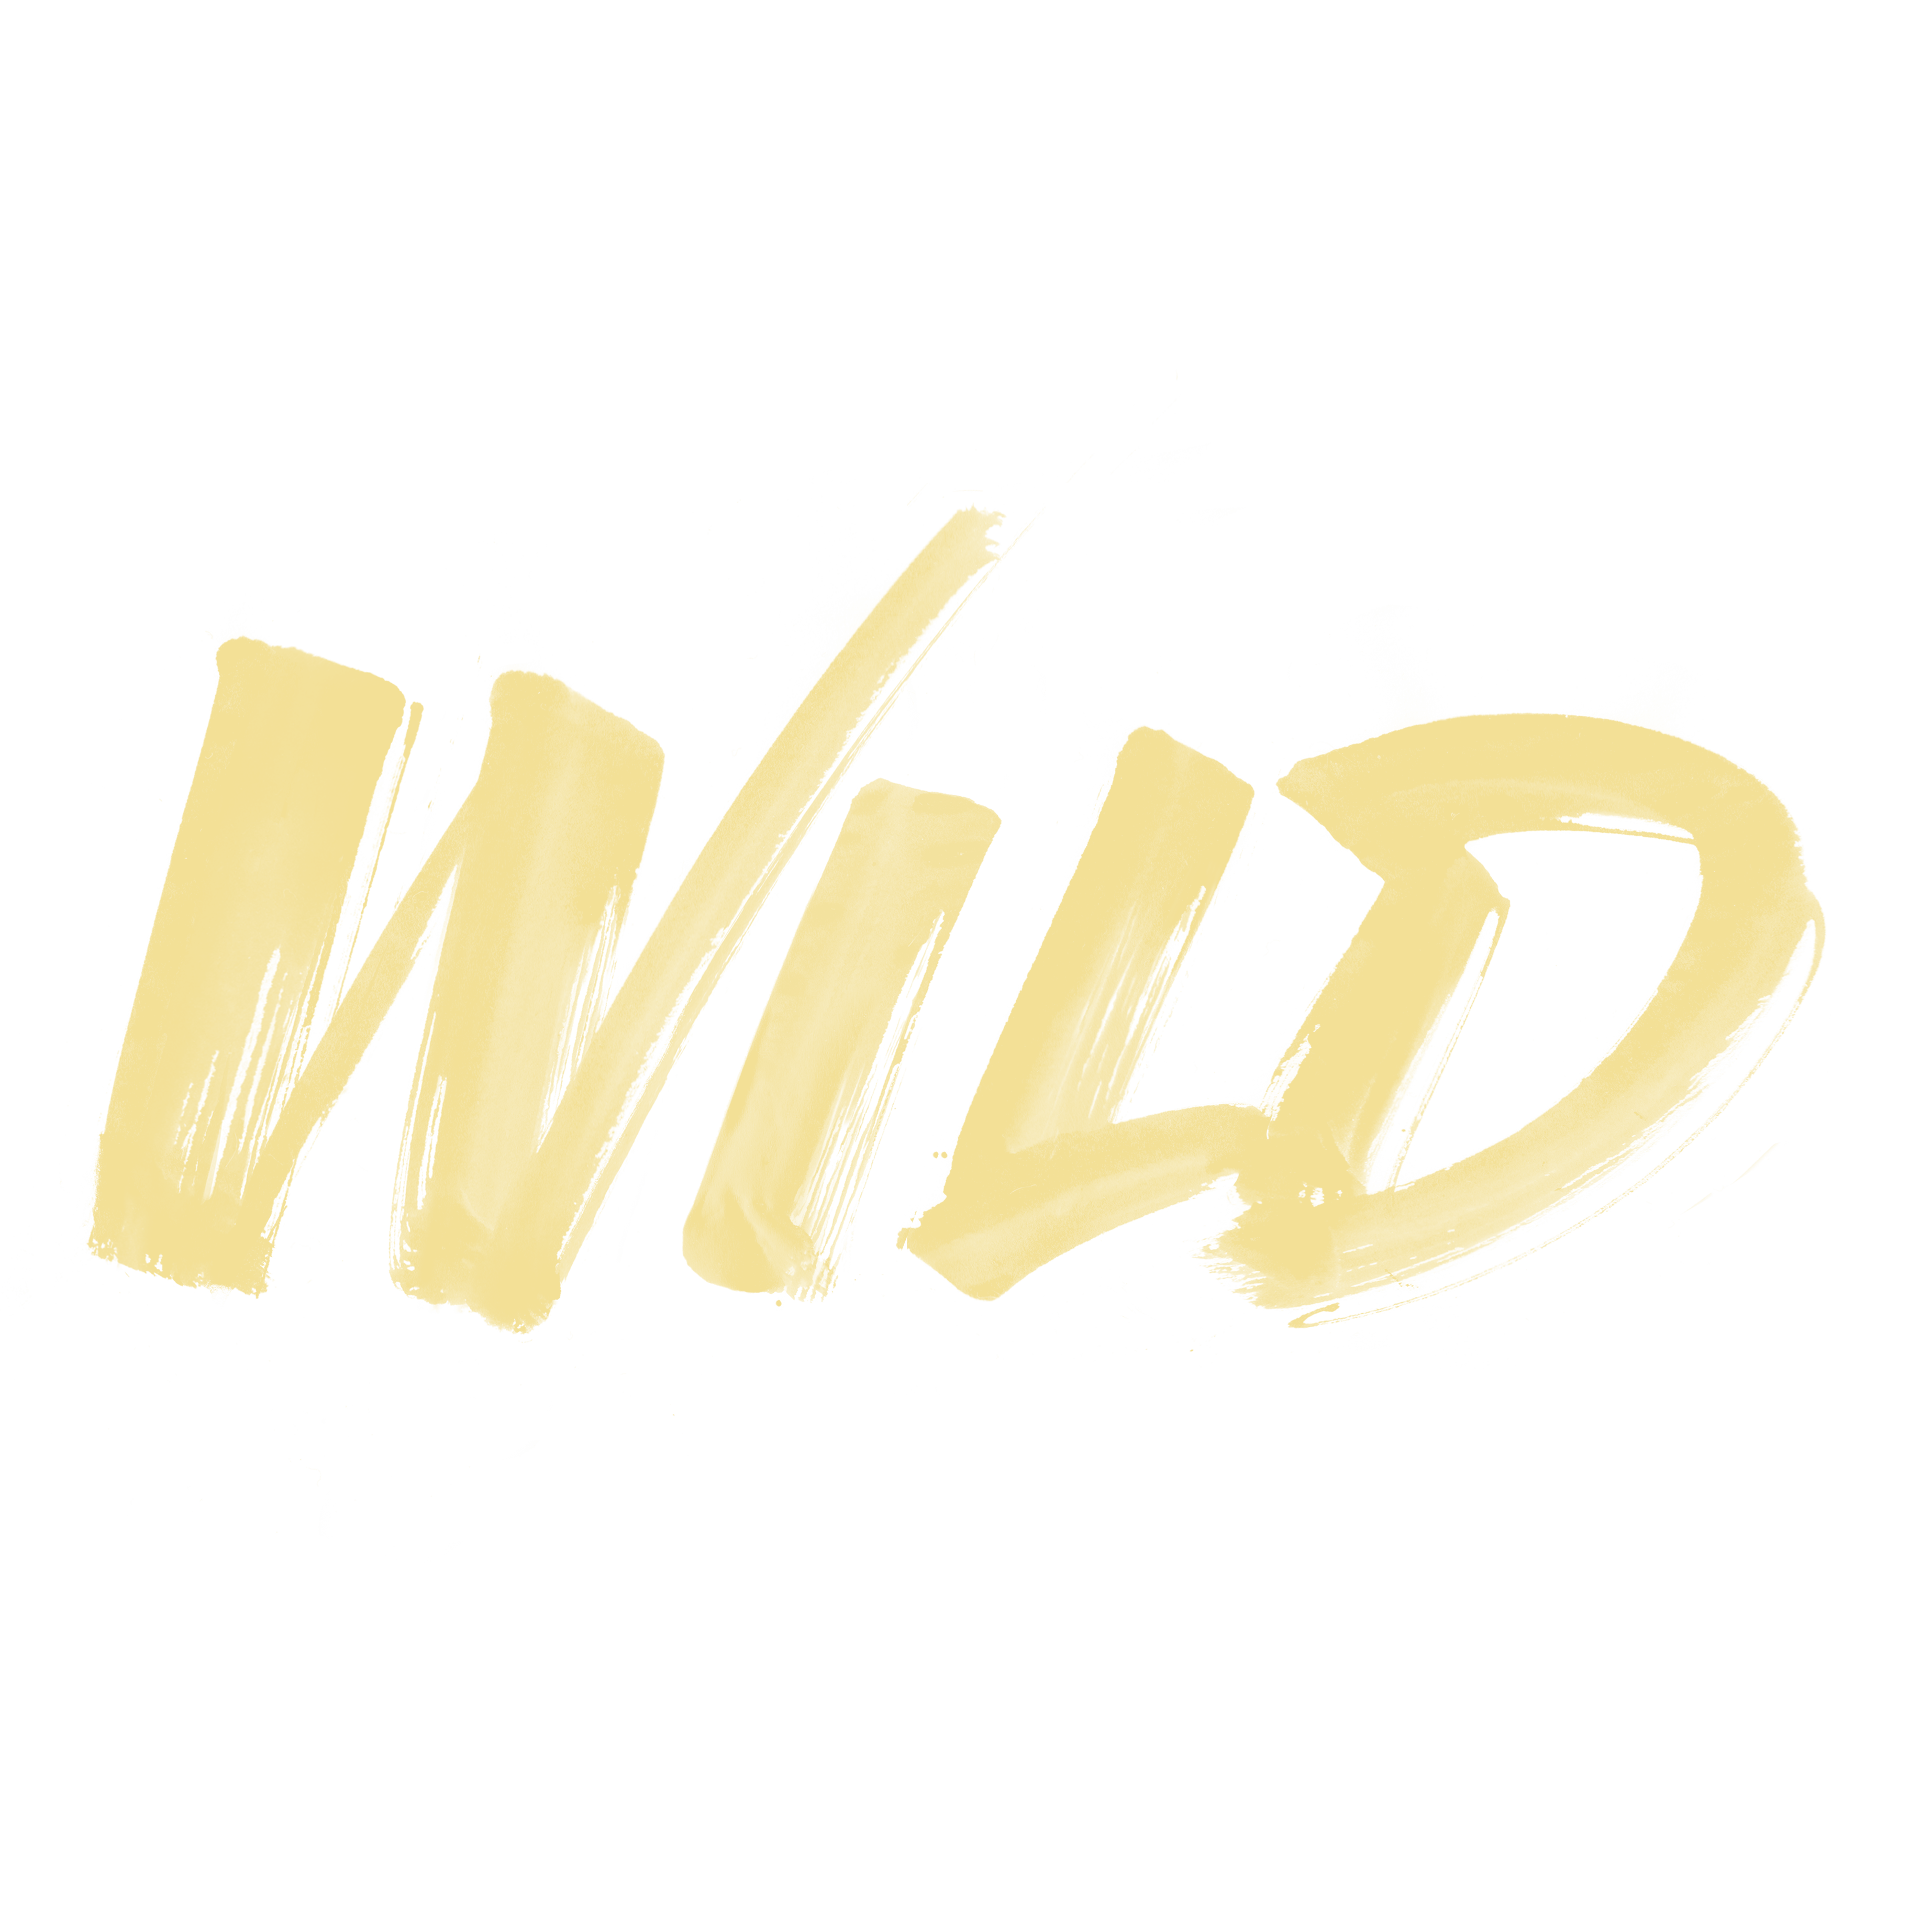 File:Wild from Troye Sivan.png - Wikimedia Commons